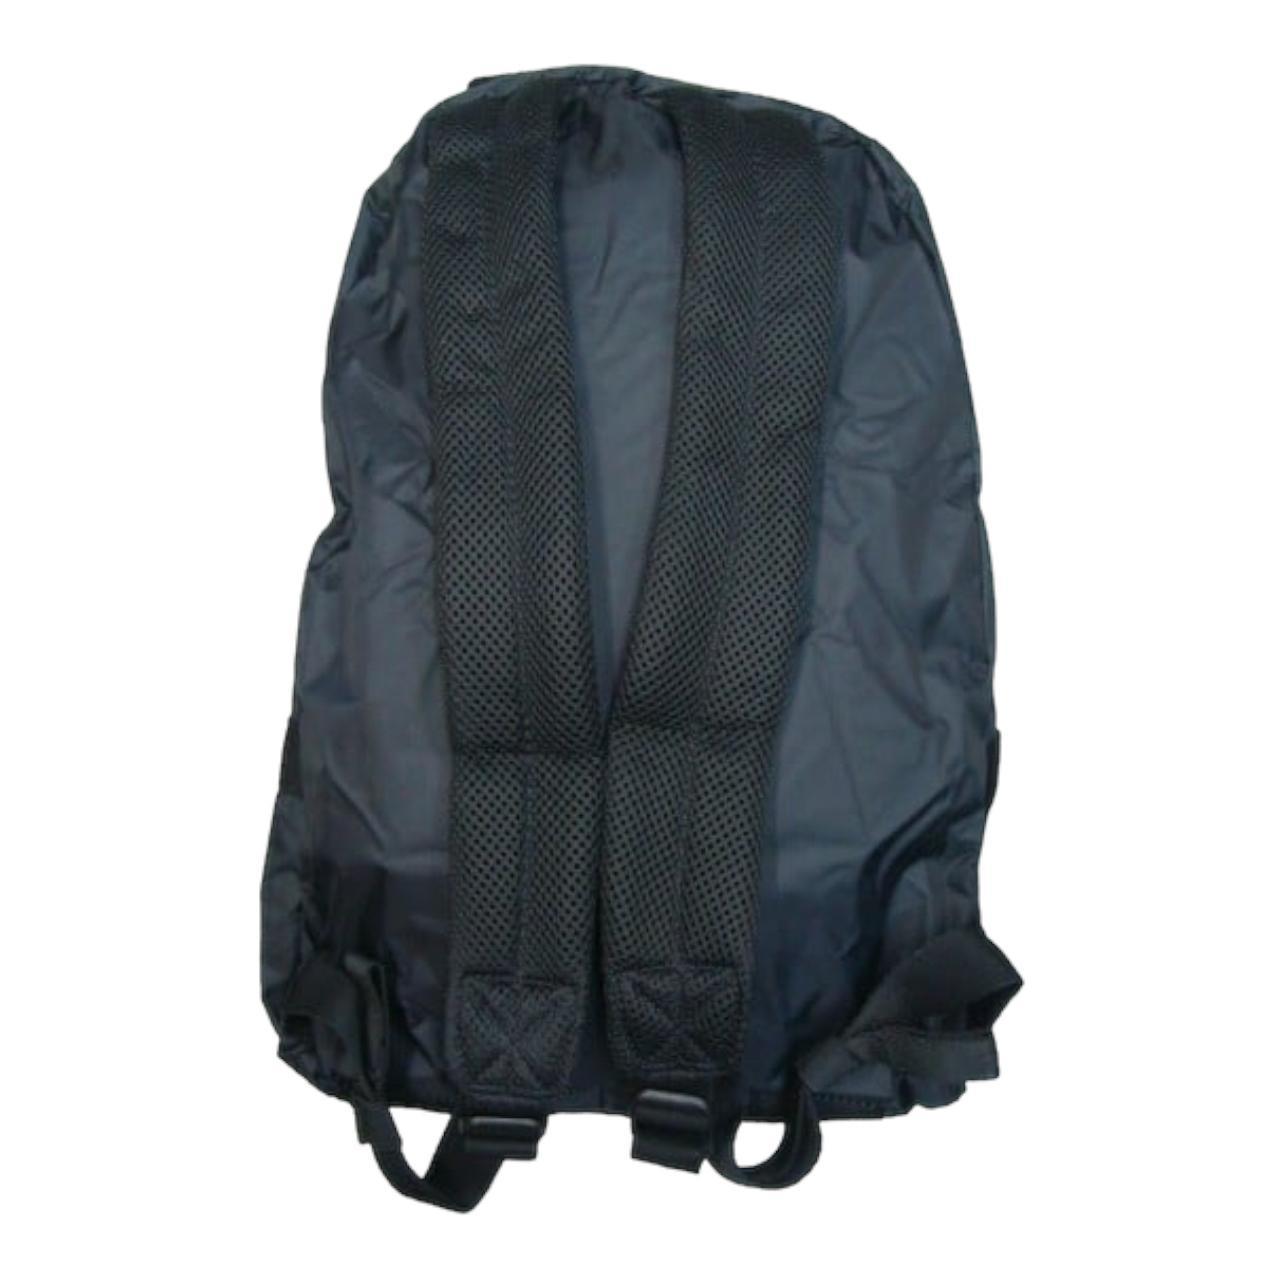 OAKLEY Packable black backpack - Known Source